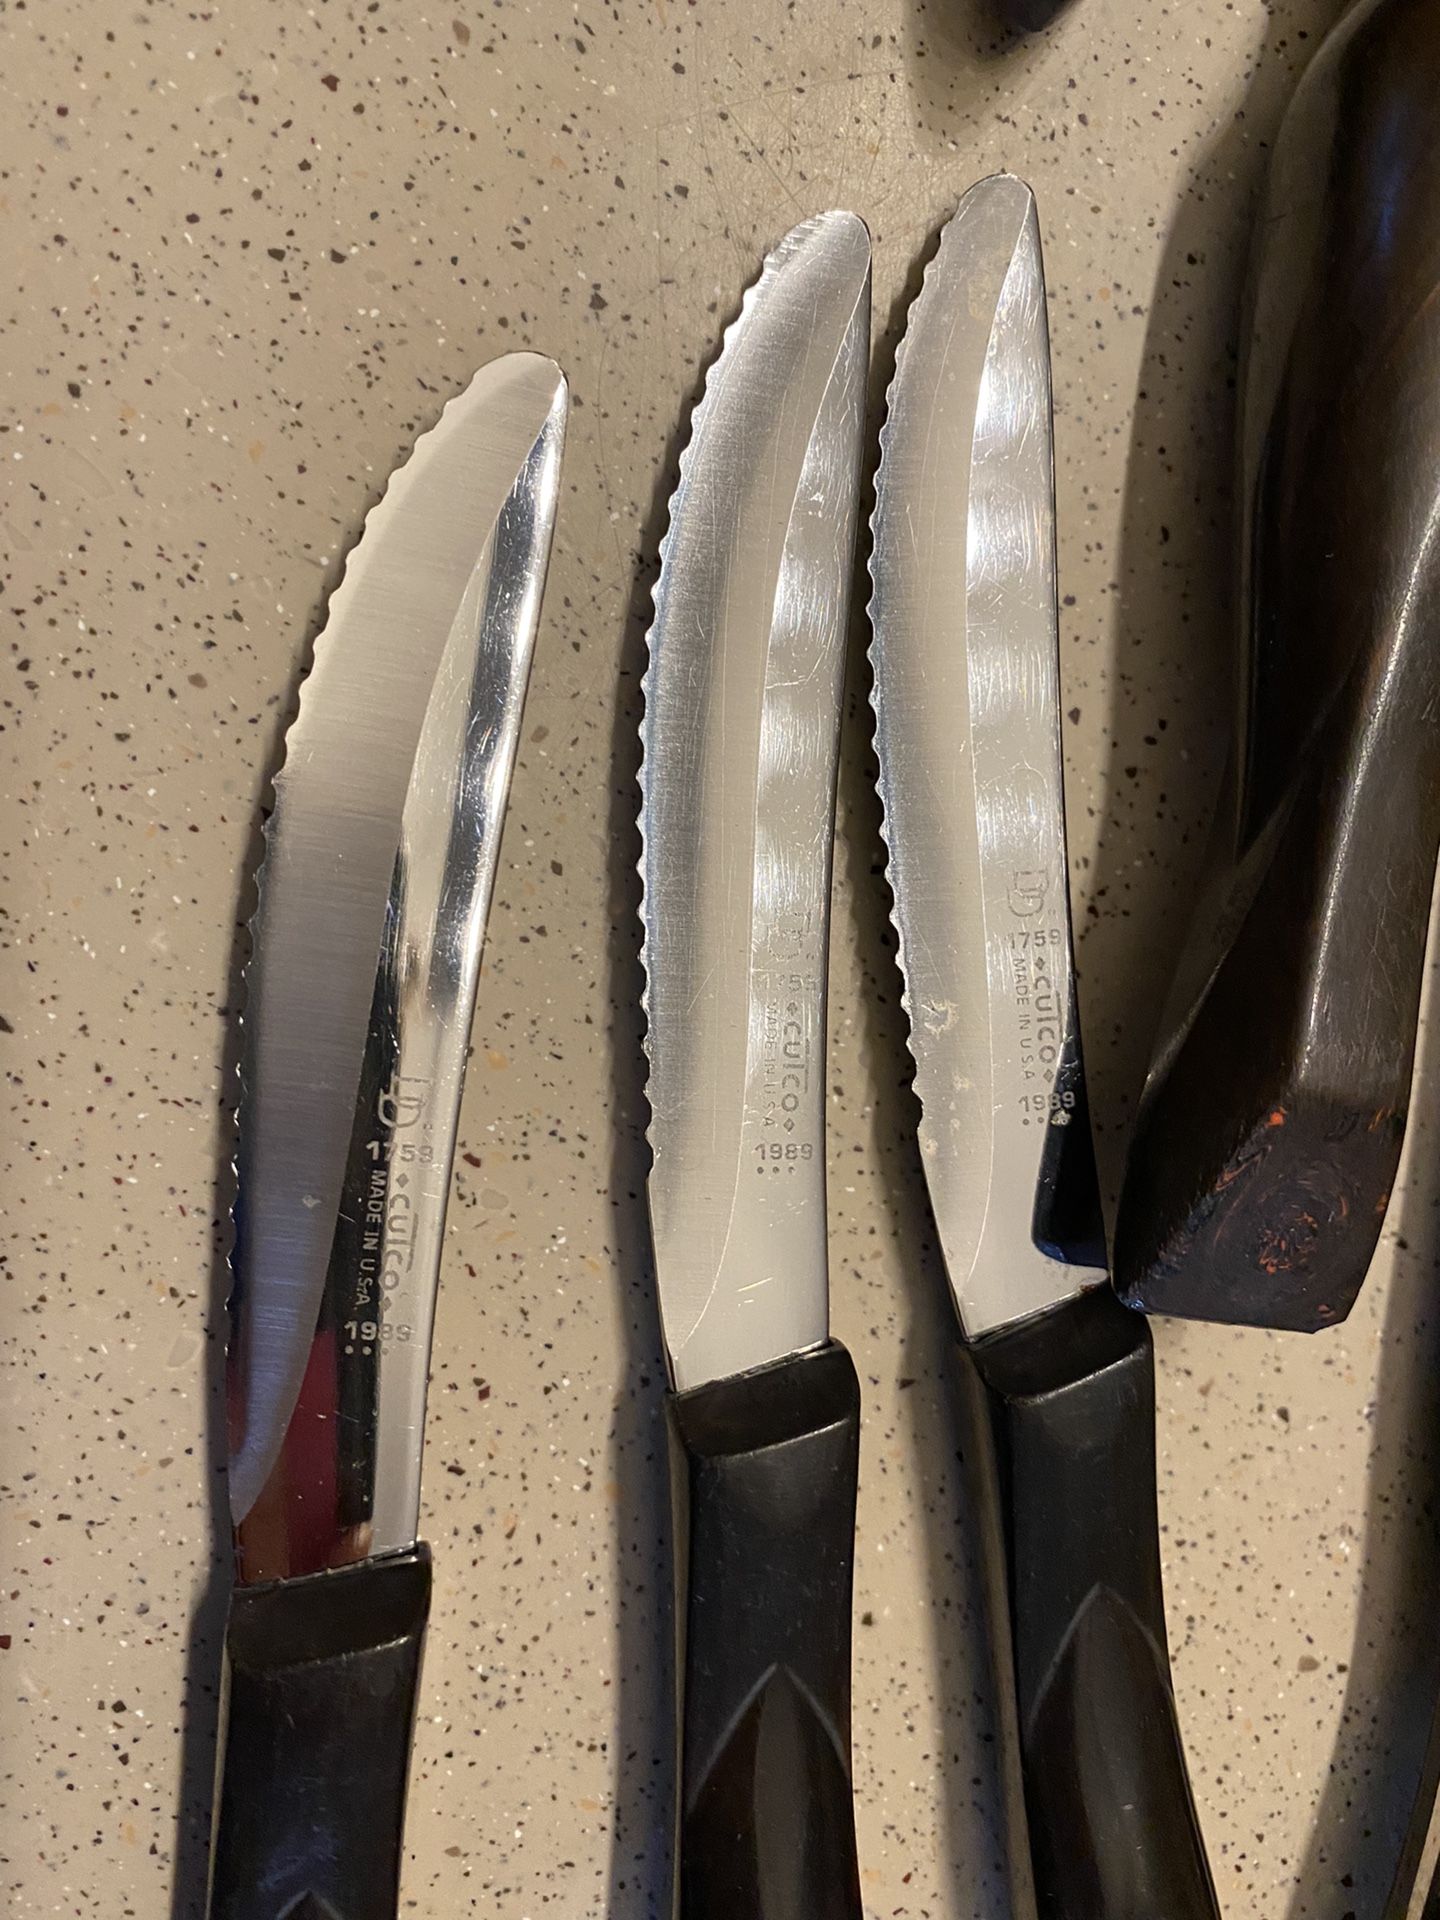 Knife Collection for Sale in Antioch, CA - OfferUp